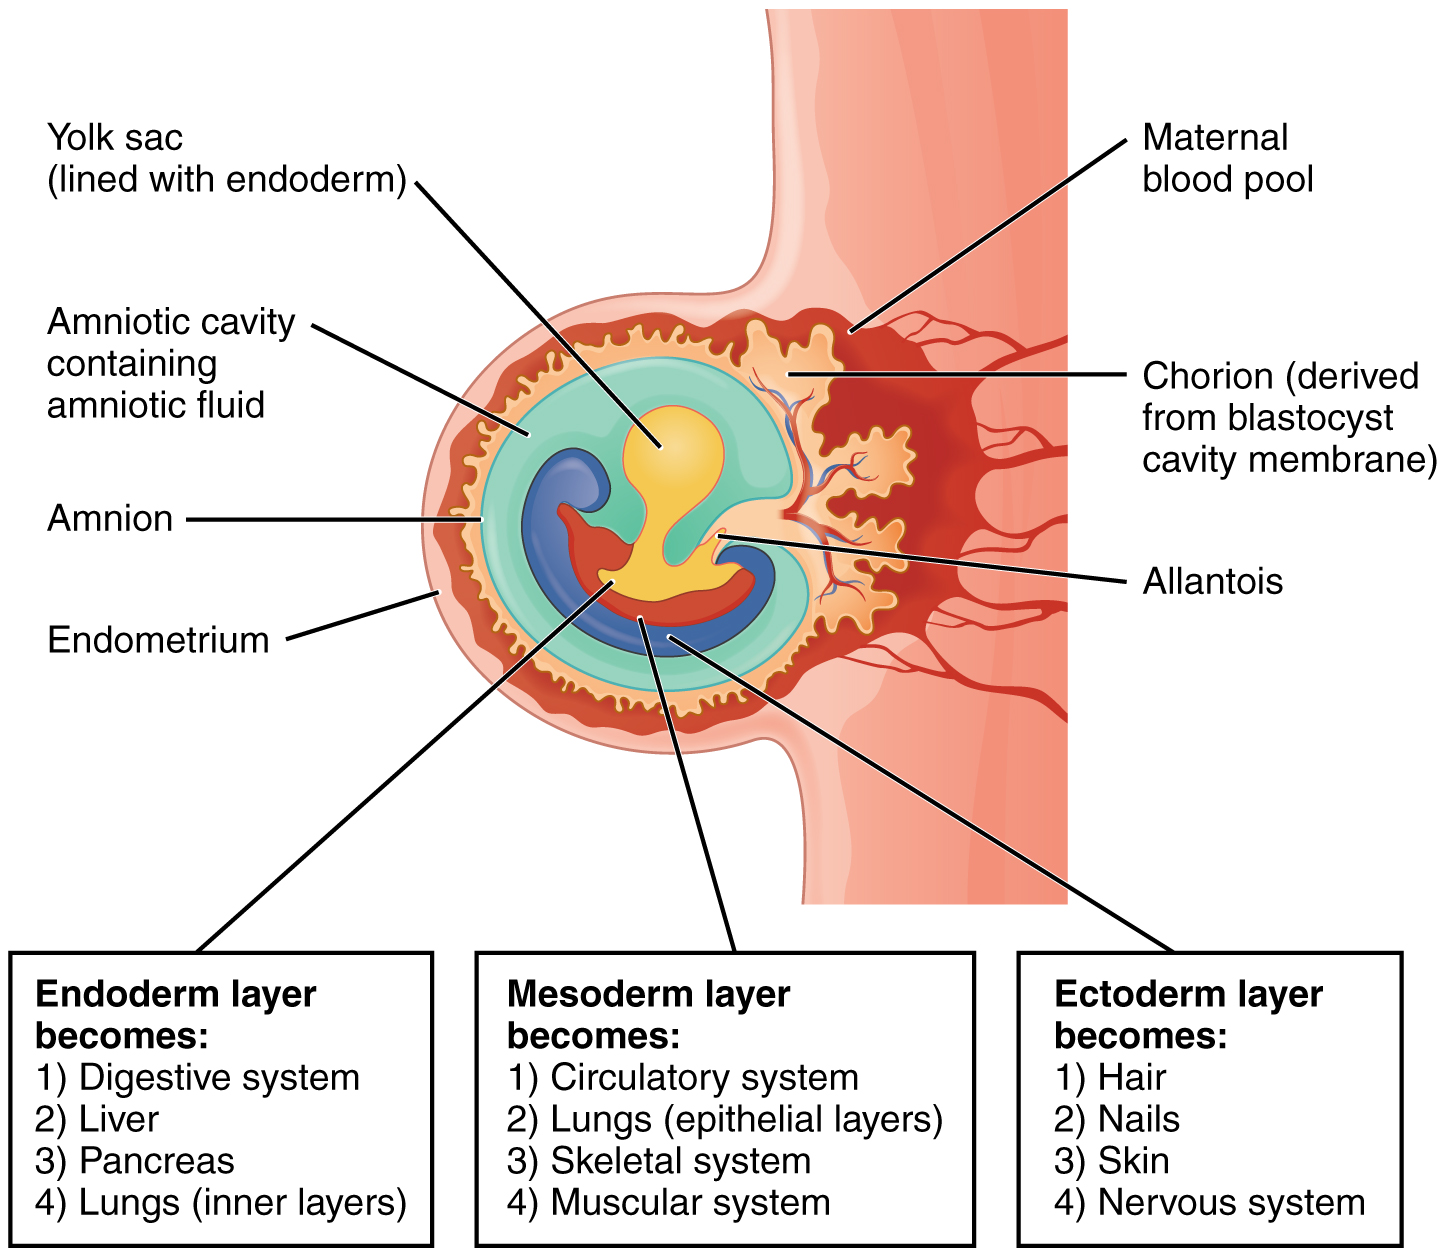 This image shows the structure of the embryo in the third week of development. Under the image, three callouts list the different organ systems into which each germ layer develops.